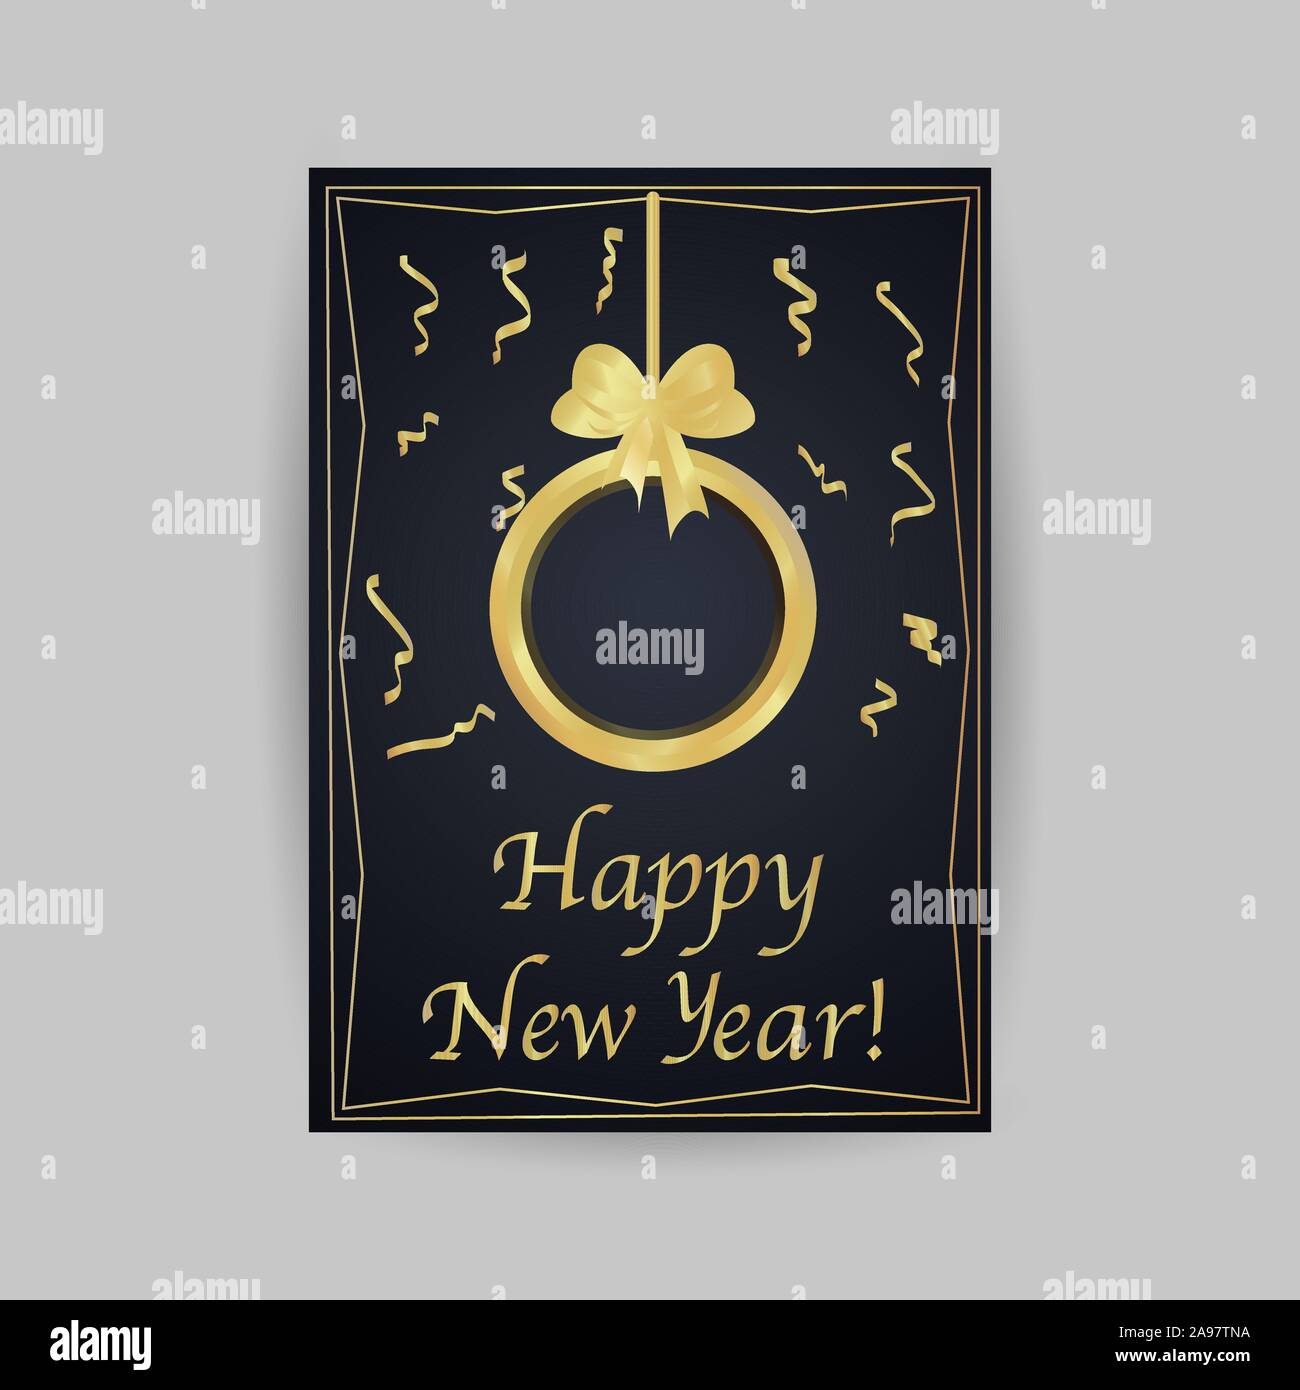 Merry Christmas and Happy new year 2020 greetings cards. Minimalism vector illustration creative golden design. For celebrating, invitation, party wit Stock Vector